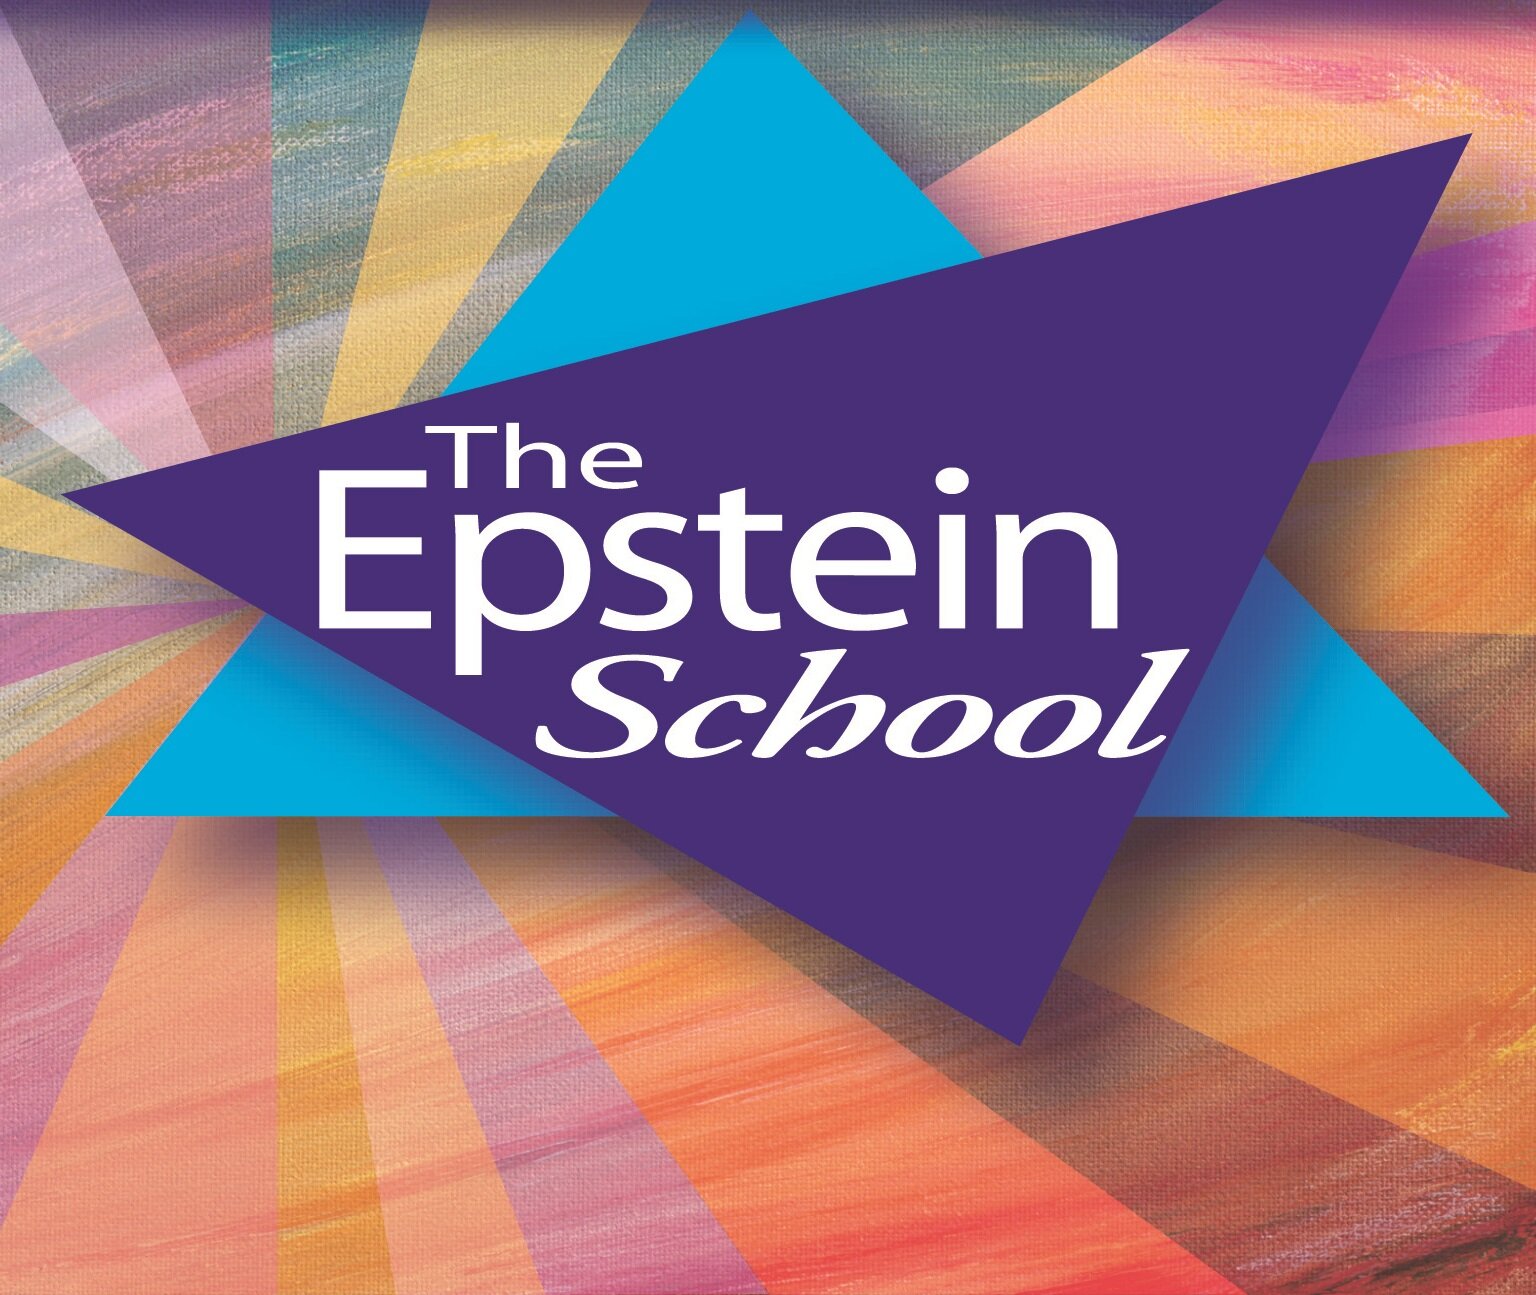 The Epstein School of Jewish Studies: providing engaging continuing Jewish education in CNY since 1969. RT = interesting, not nec. endorsement